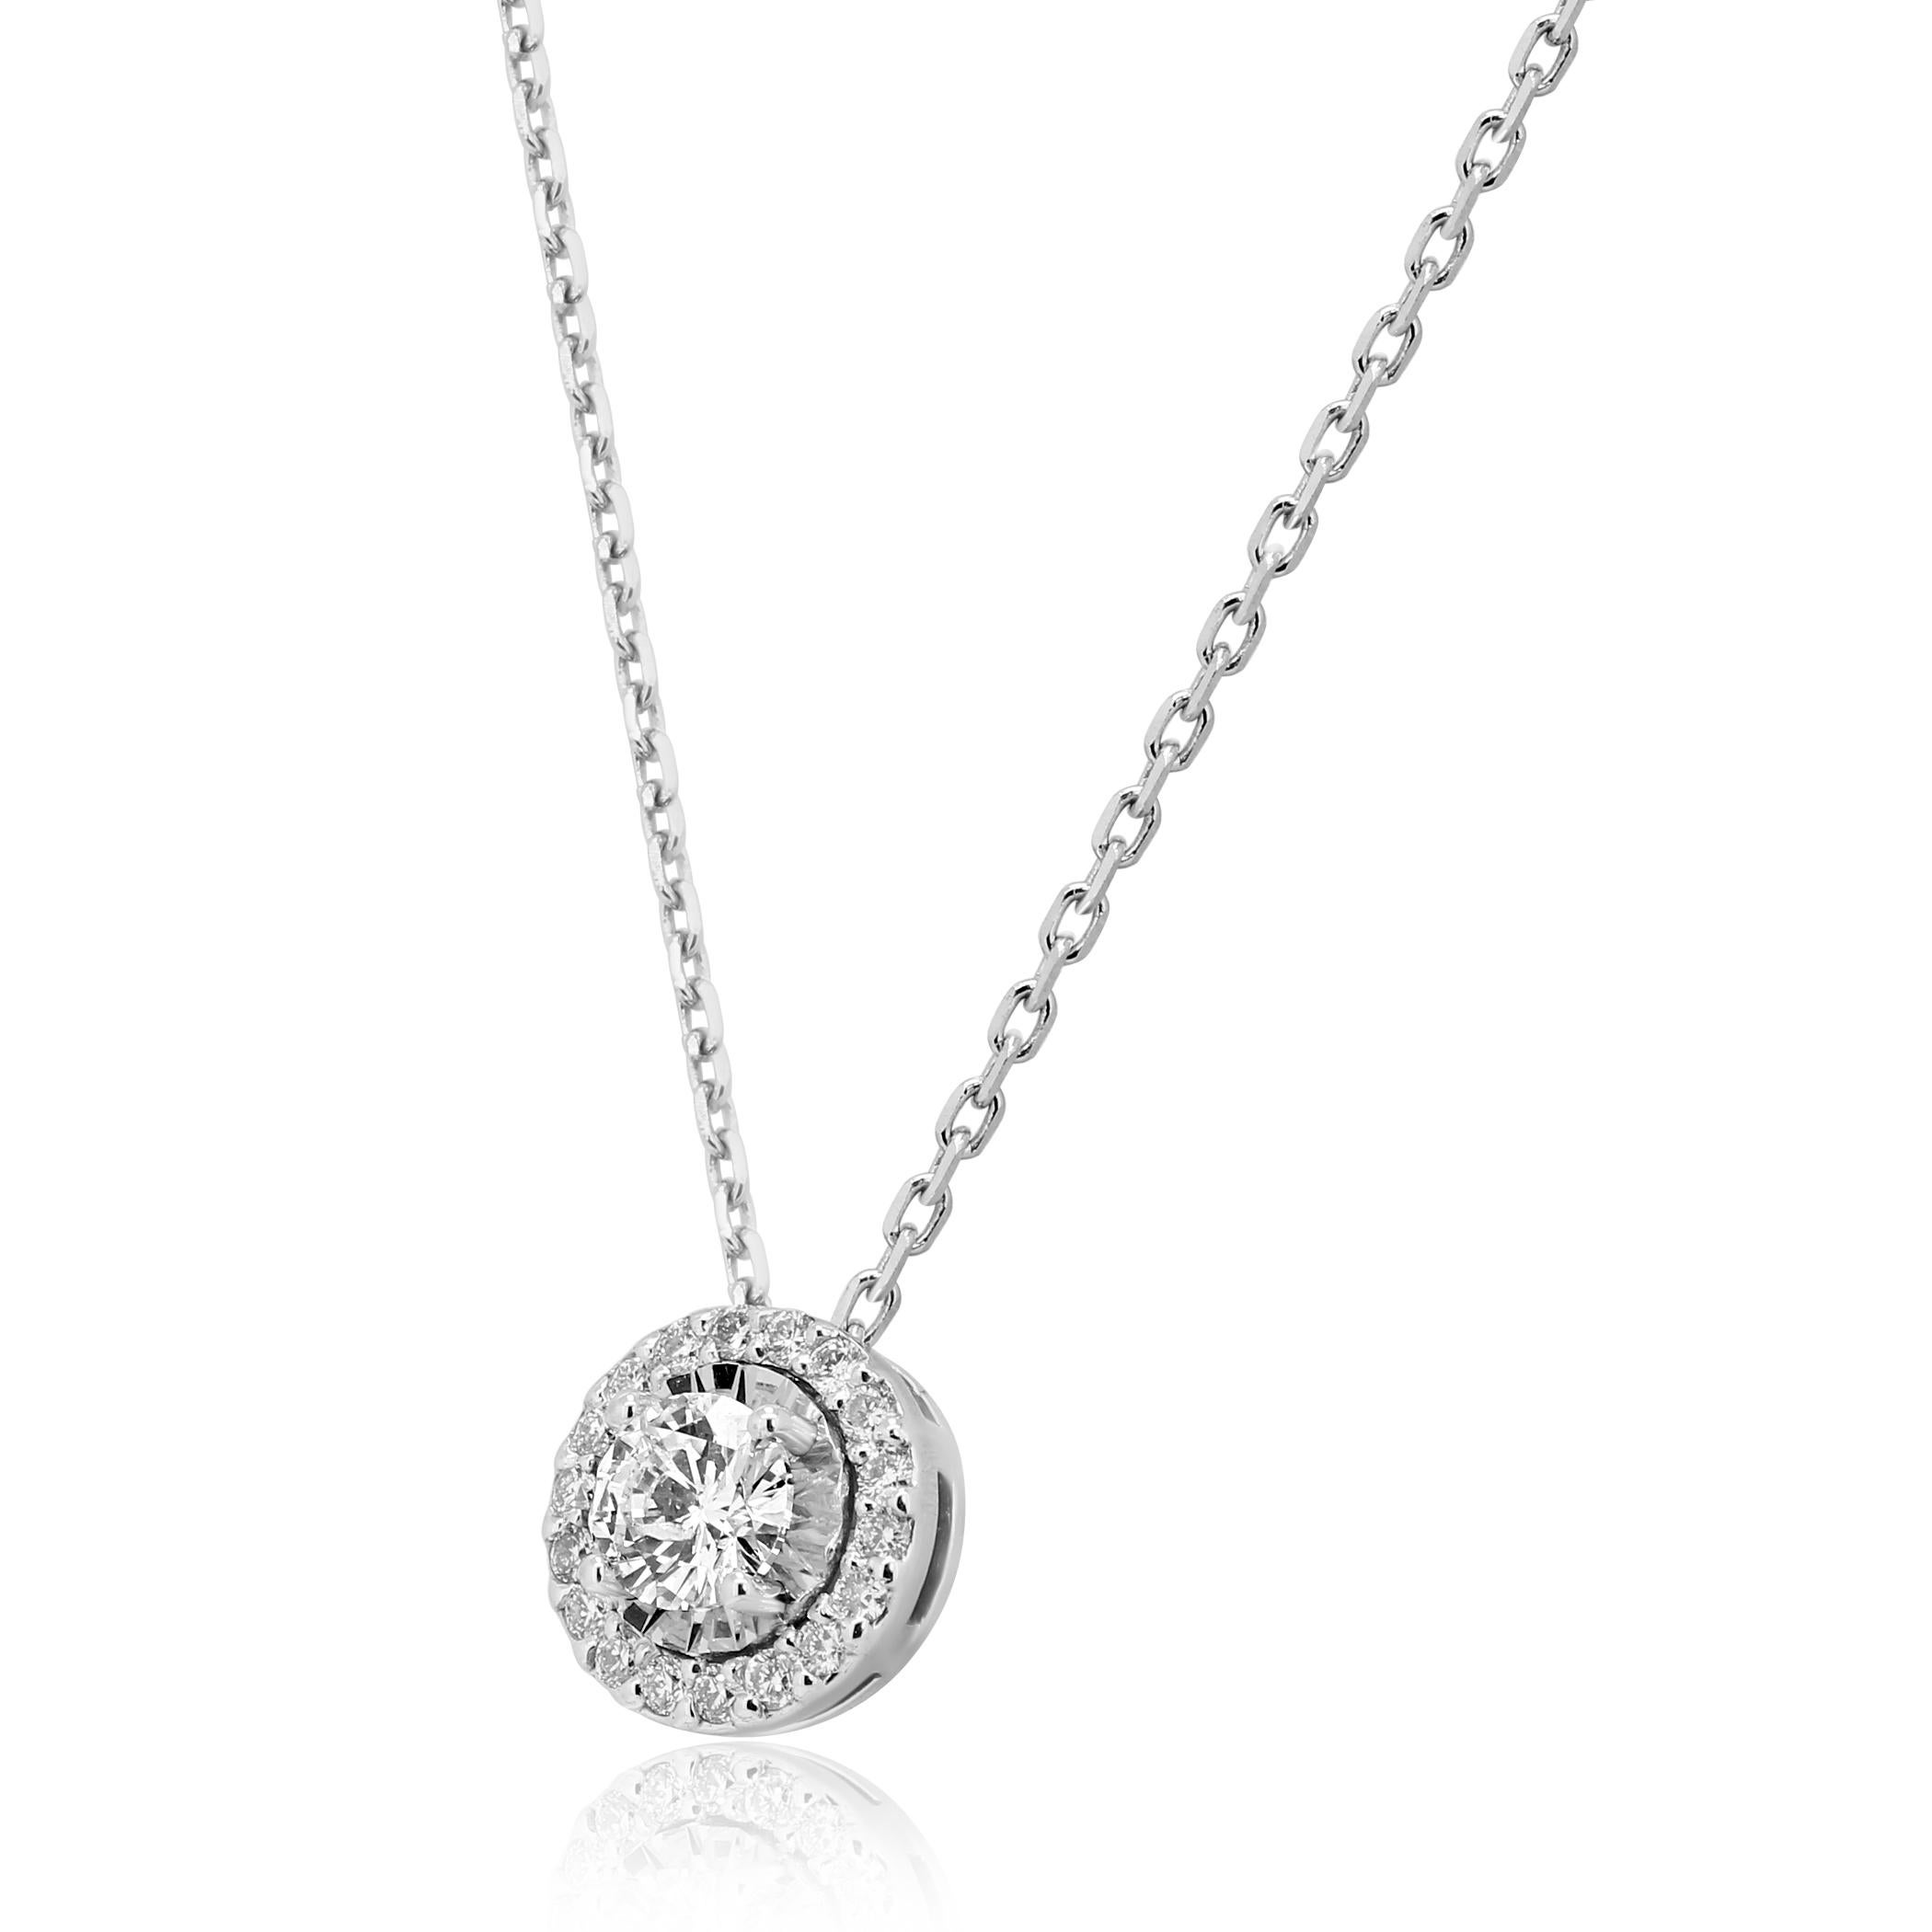 Gorgeous White G-H Color SI Diamond Round 0.45 Carat encircled in a single Halo of White Diamond  G-H Color SI Clarity 0.17 Carat in 14K White Gold Classic but always in style Solitaire Pendant chain Necklace. Total Diamond Weight 0.62 Carat.

Style